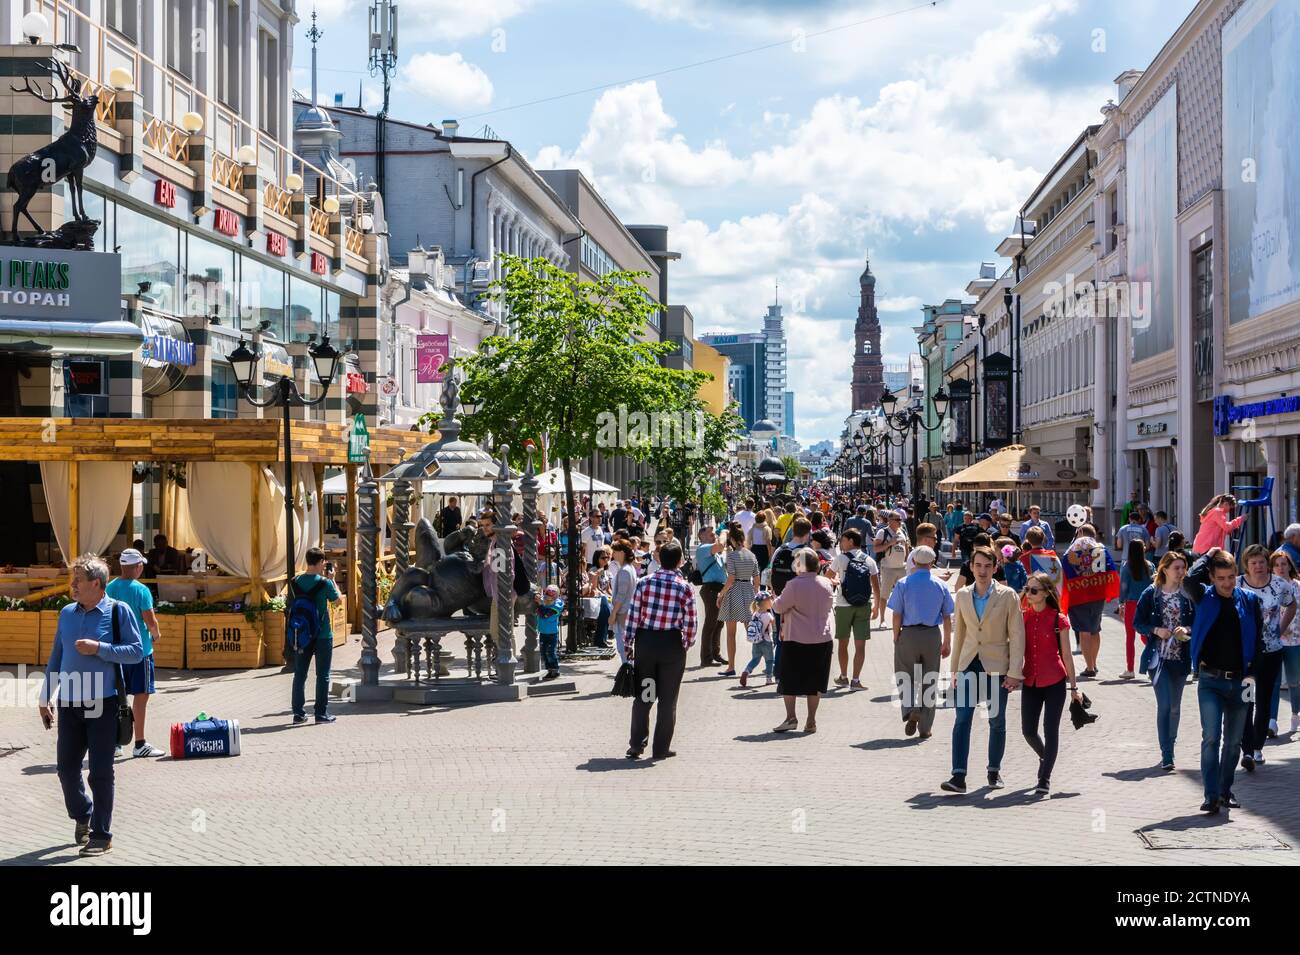 Kazan, Russia – June 24, 2017. View of Bauman street, the main pedestrian street of Kazan, the capital of Tatarstan, with people and commercial proper Stock Photo